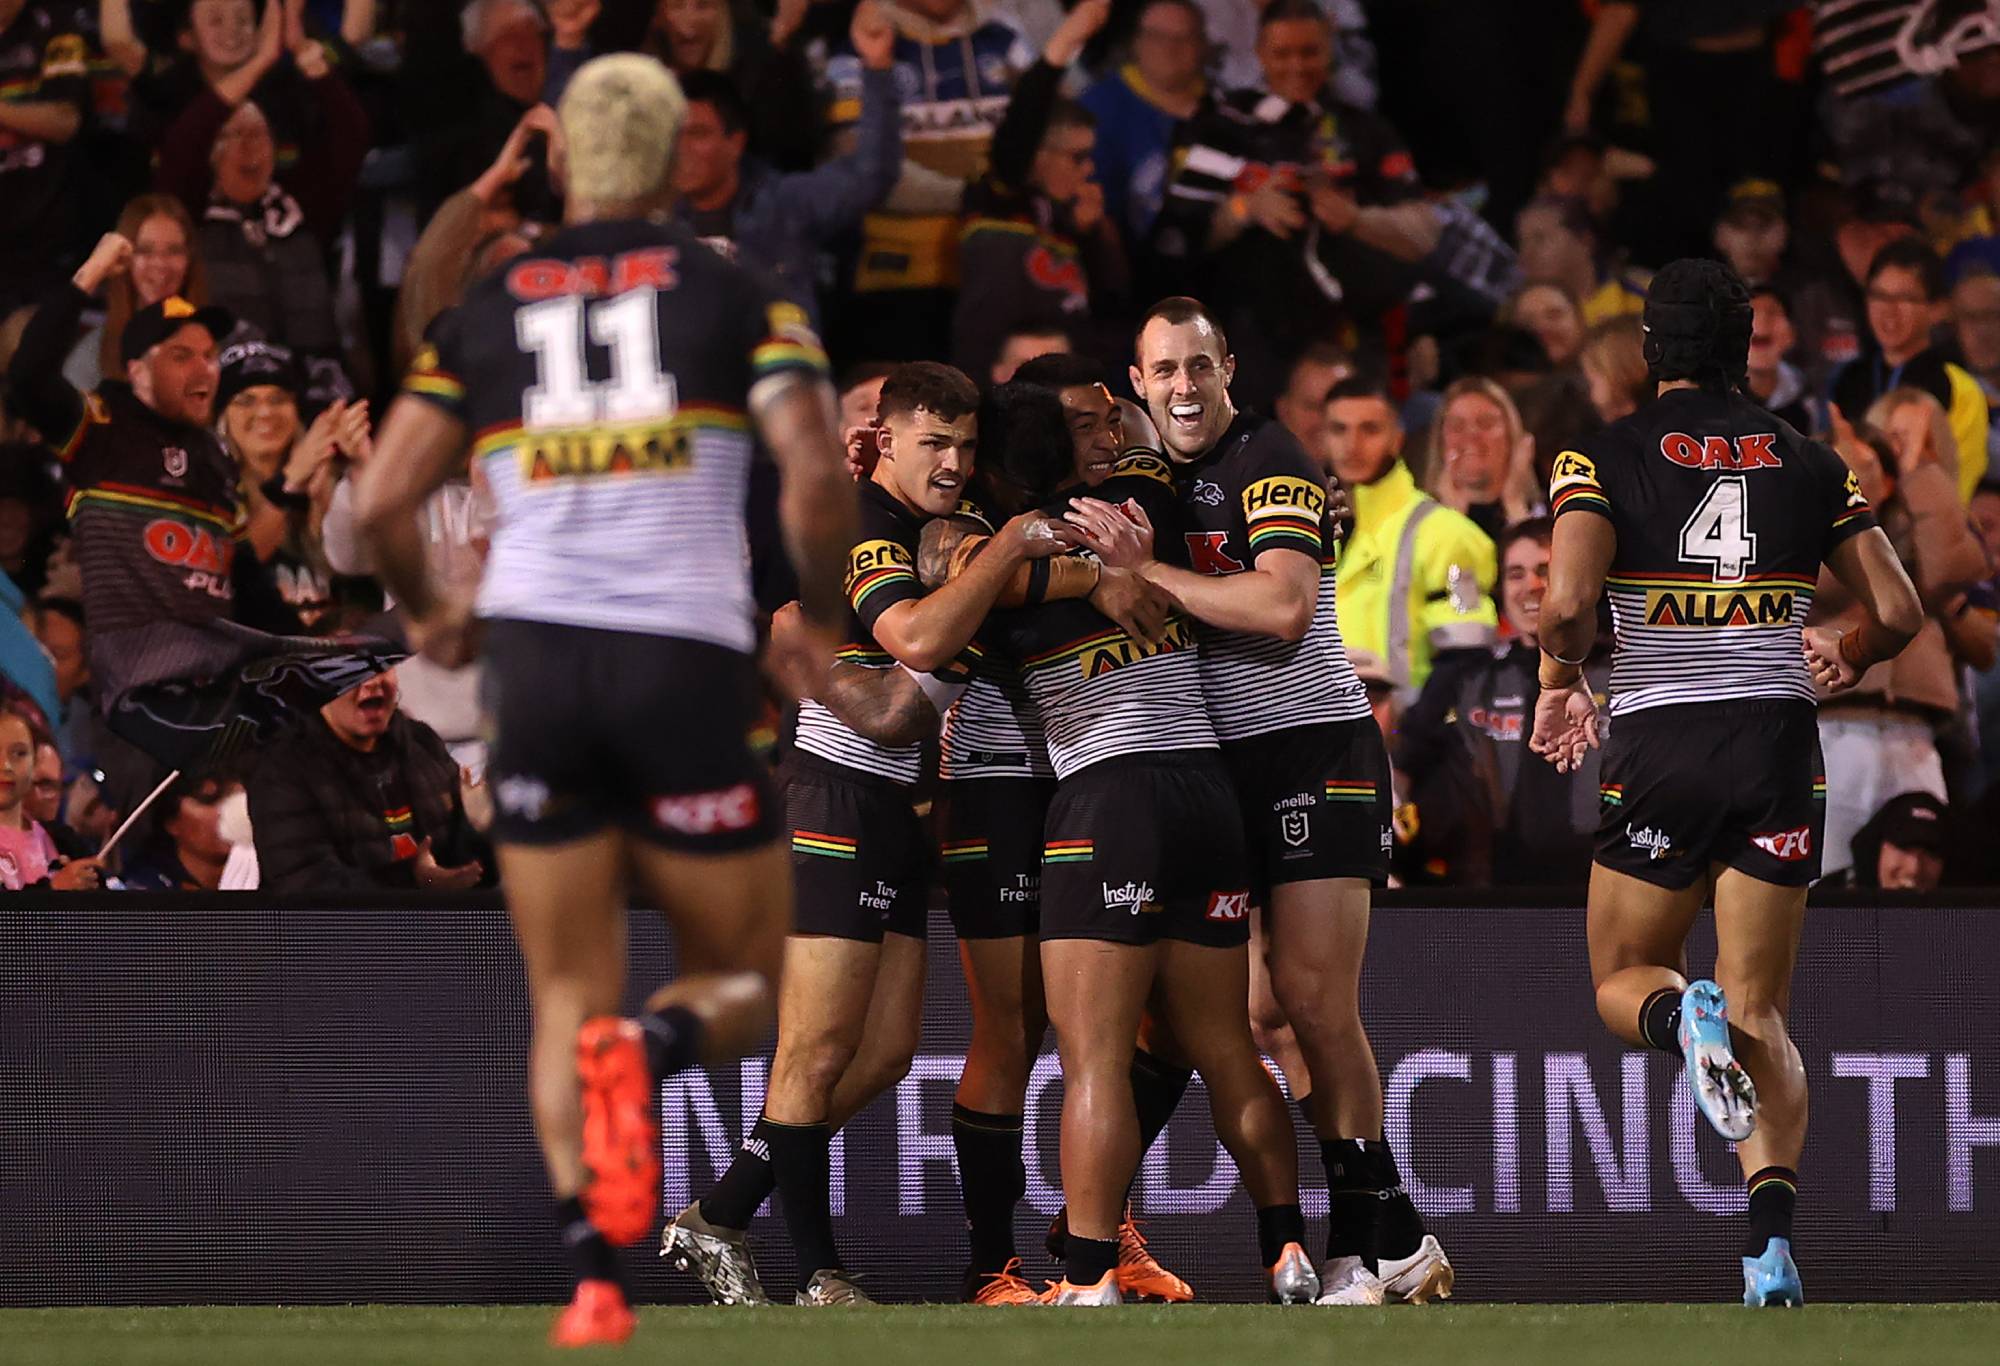 PENRITH, AUSTRALIA - SEPTEMBER 09: Brian To'o of the Panthers celebrates with team mates after scoring a try during the NRL Qualifying Final match between the Penrith Panthers and the Parramatta Eels at BlueBet Stadium on September 09, 2022 in Penrith, Australia. (Photo by Mark Kolbe/Getty Images)